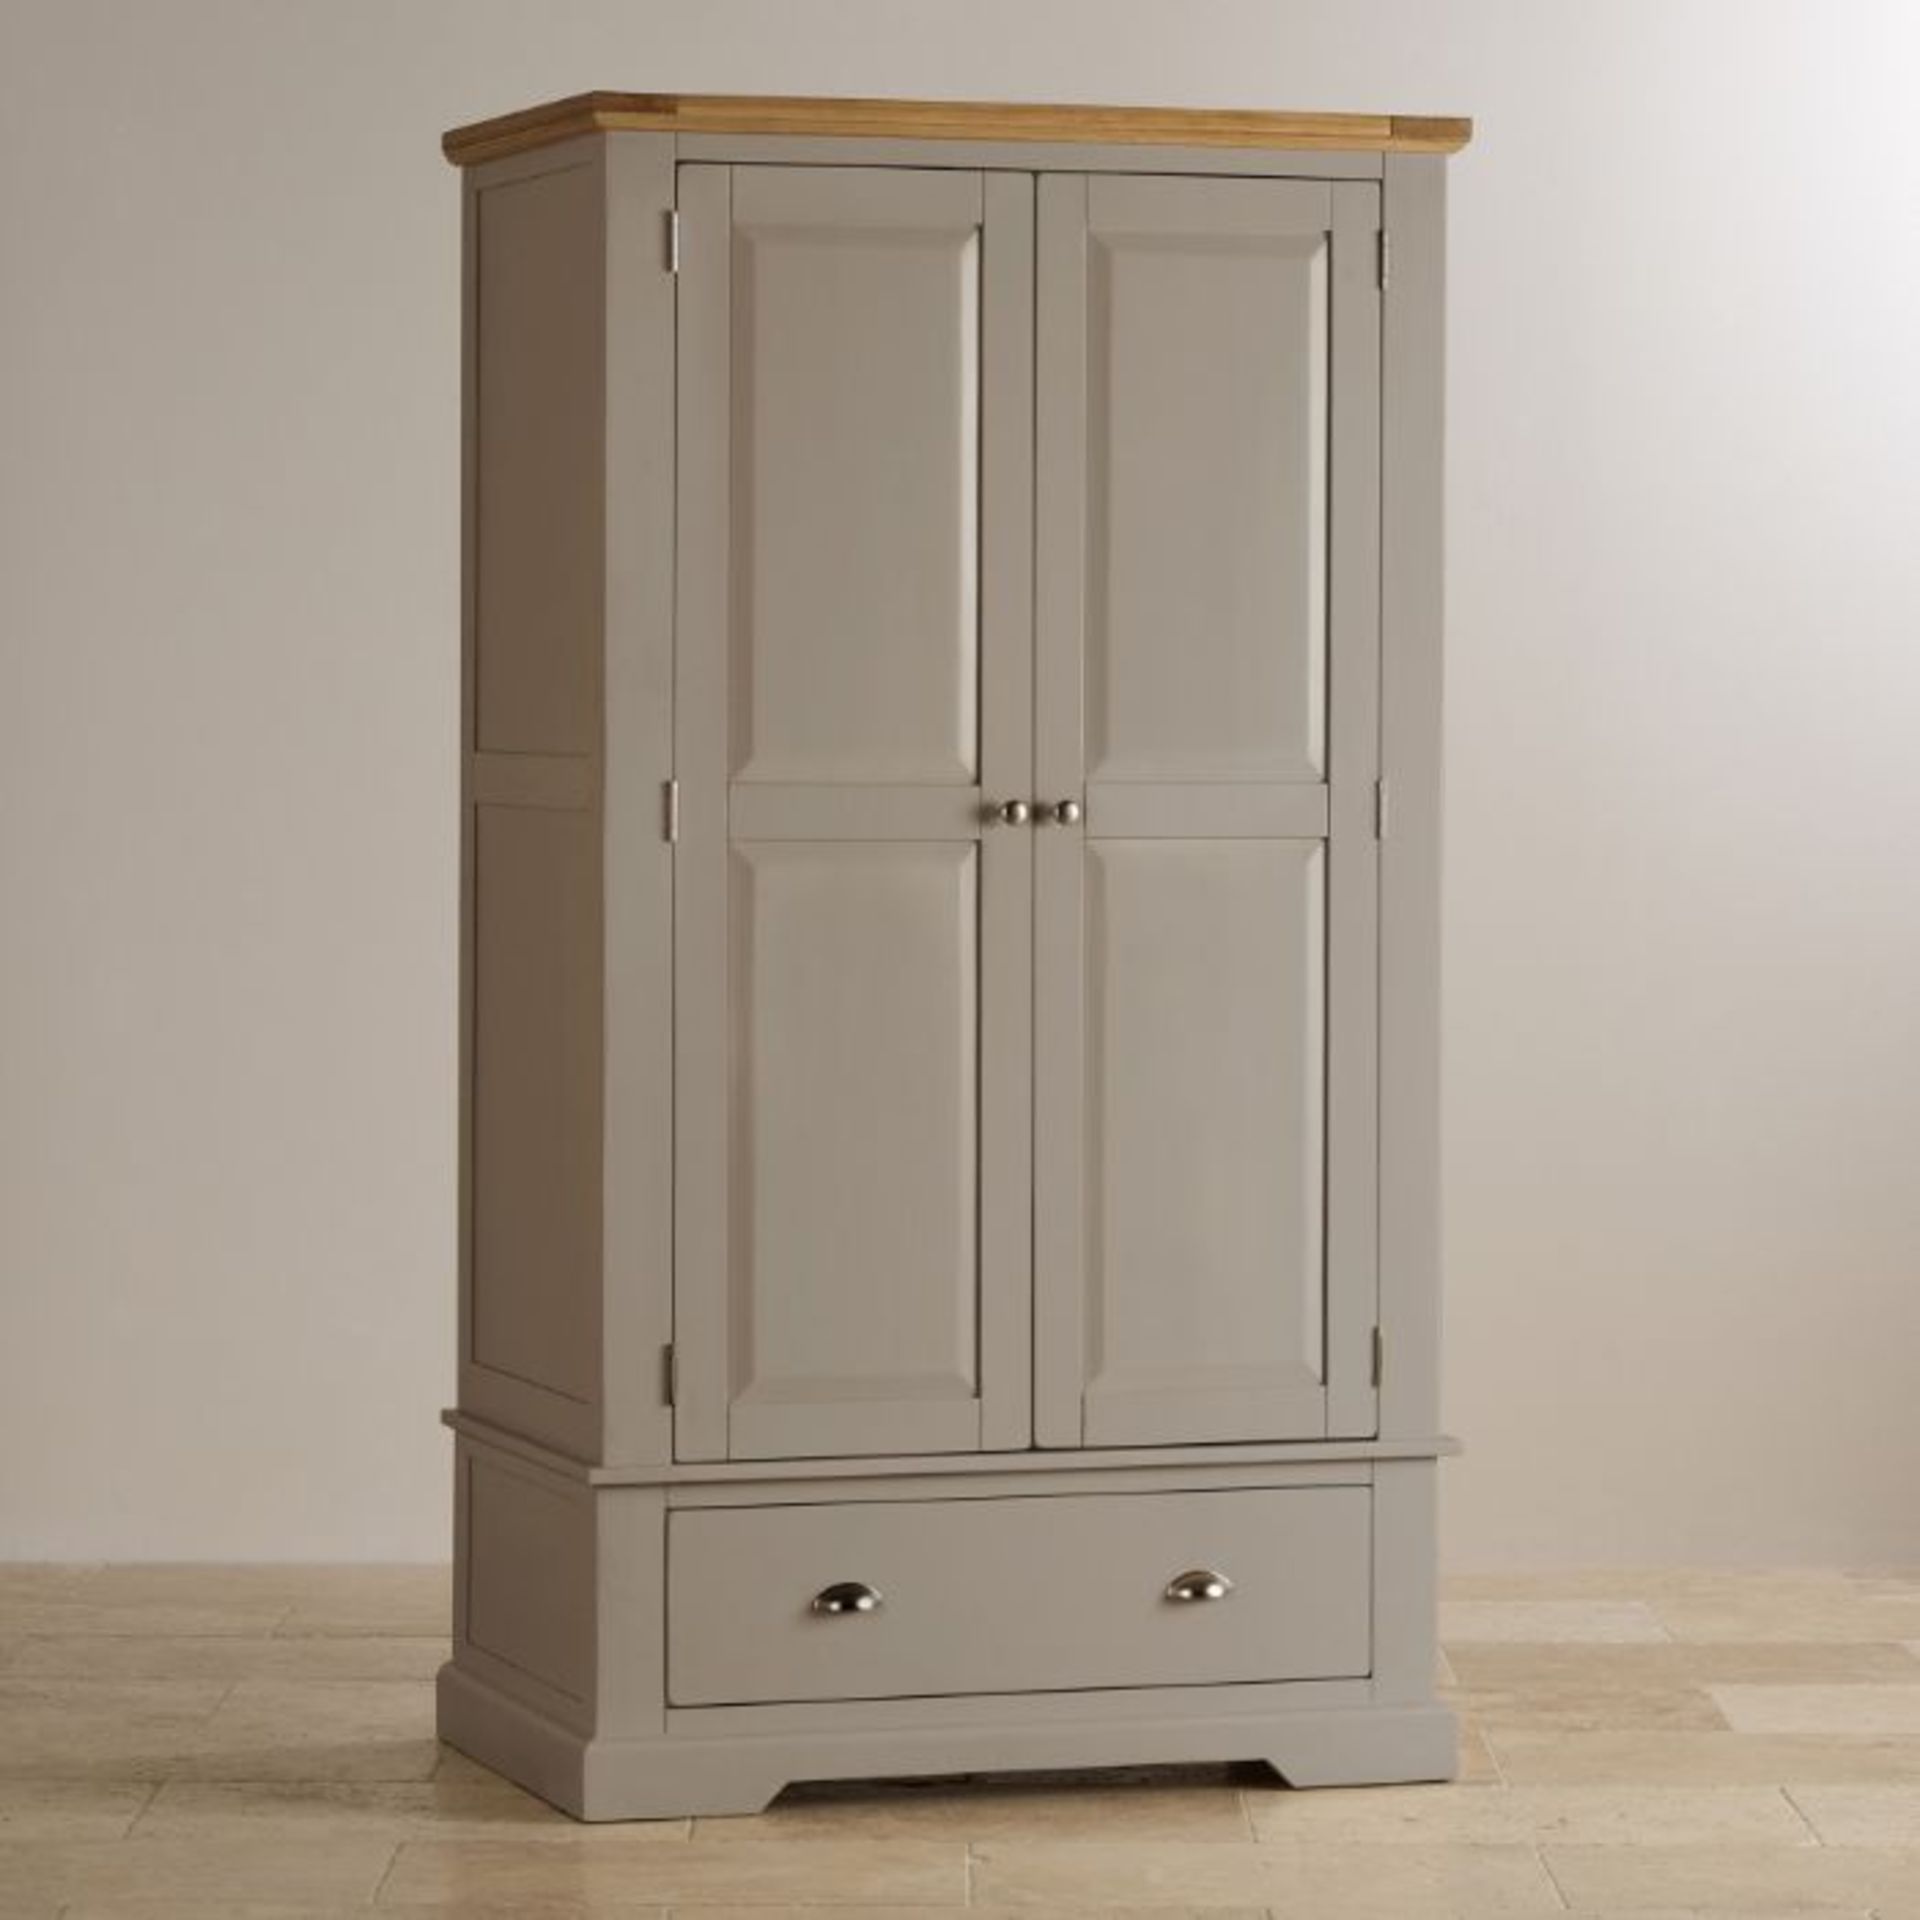 Oak Furnitureland St Ives Natural Oak And Light Grey Painted Double Wardrobe RRP ?694.99 The St Ives - Image 5 of 7